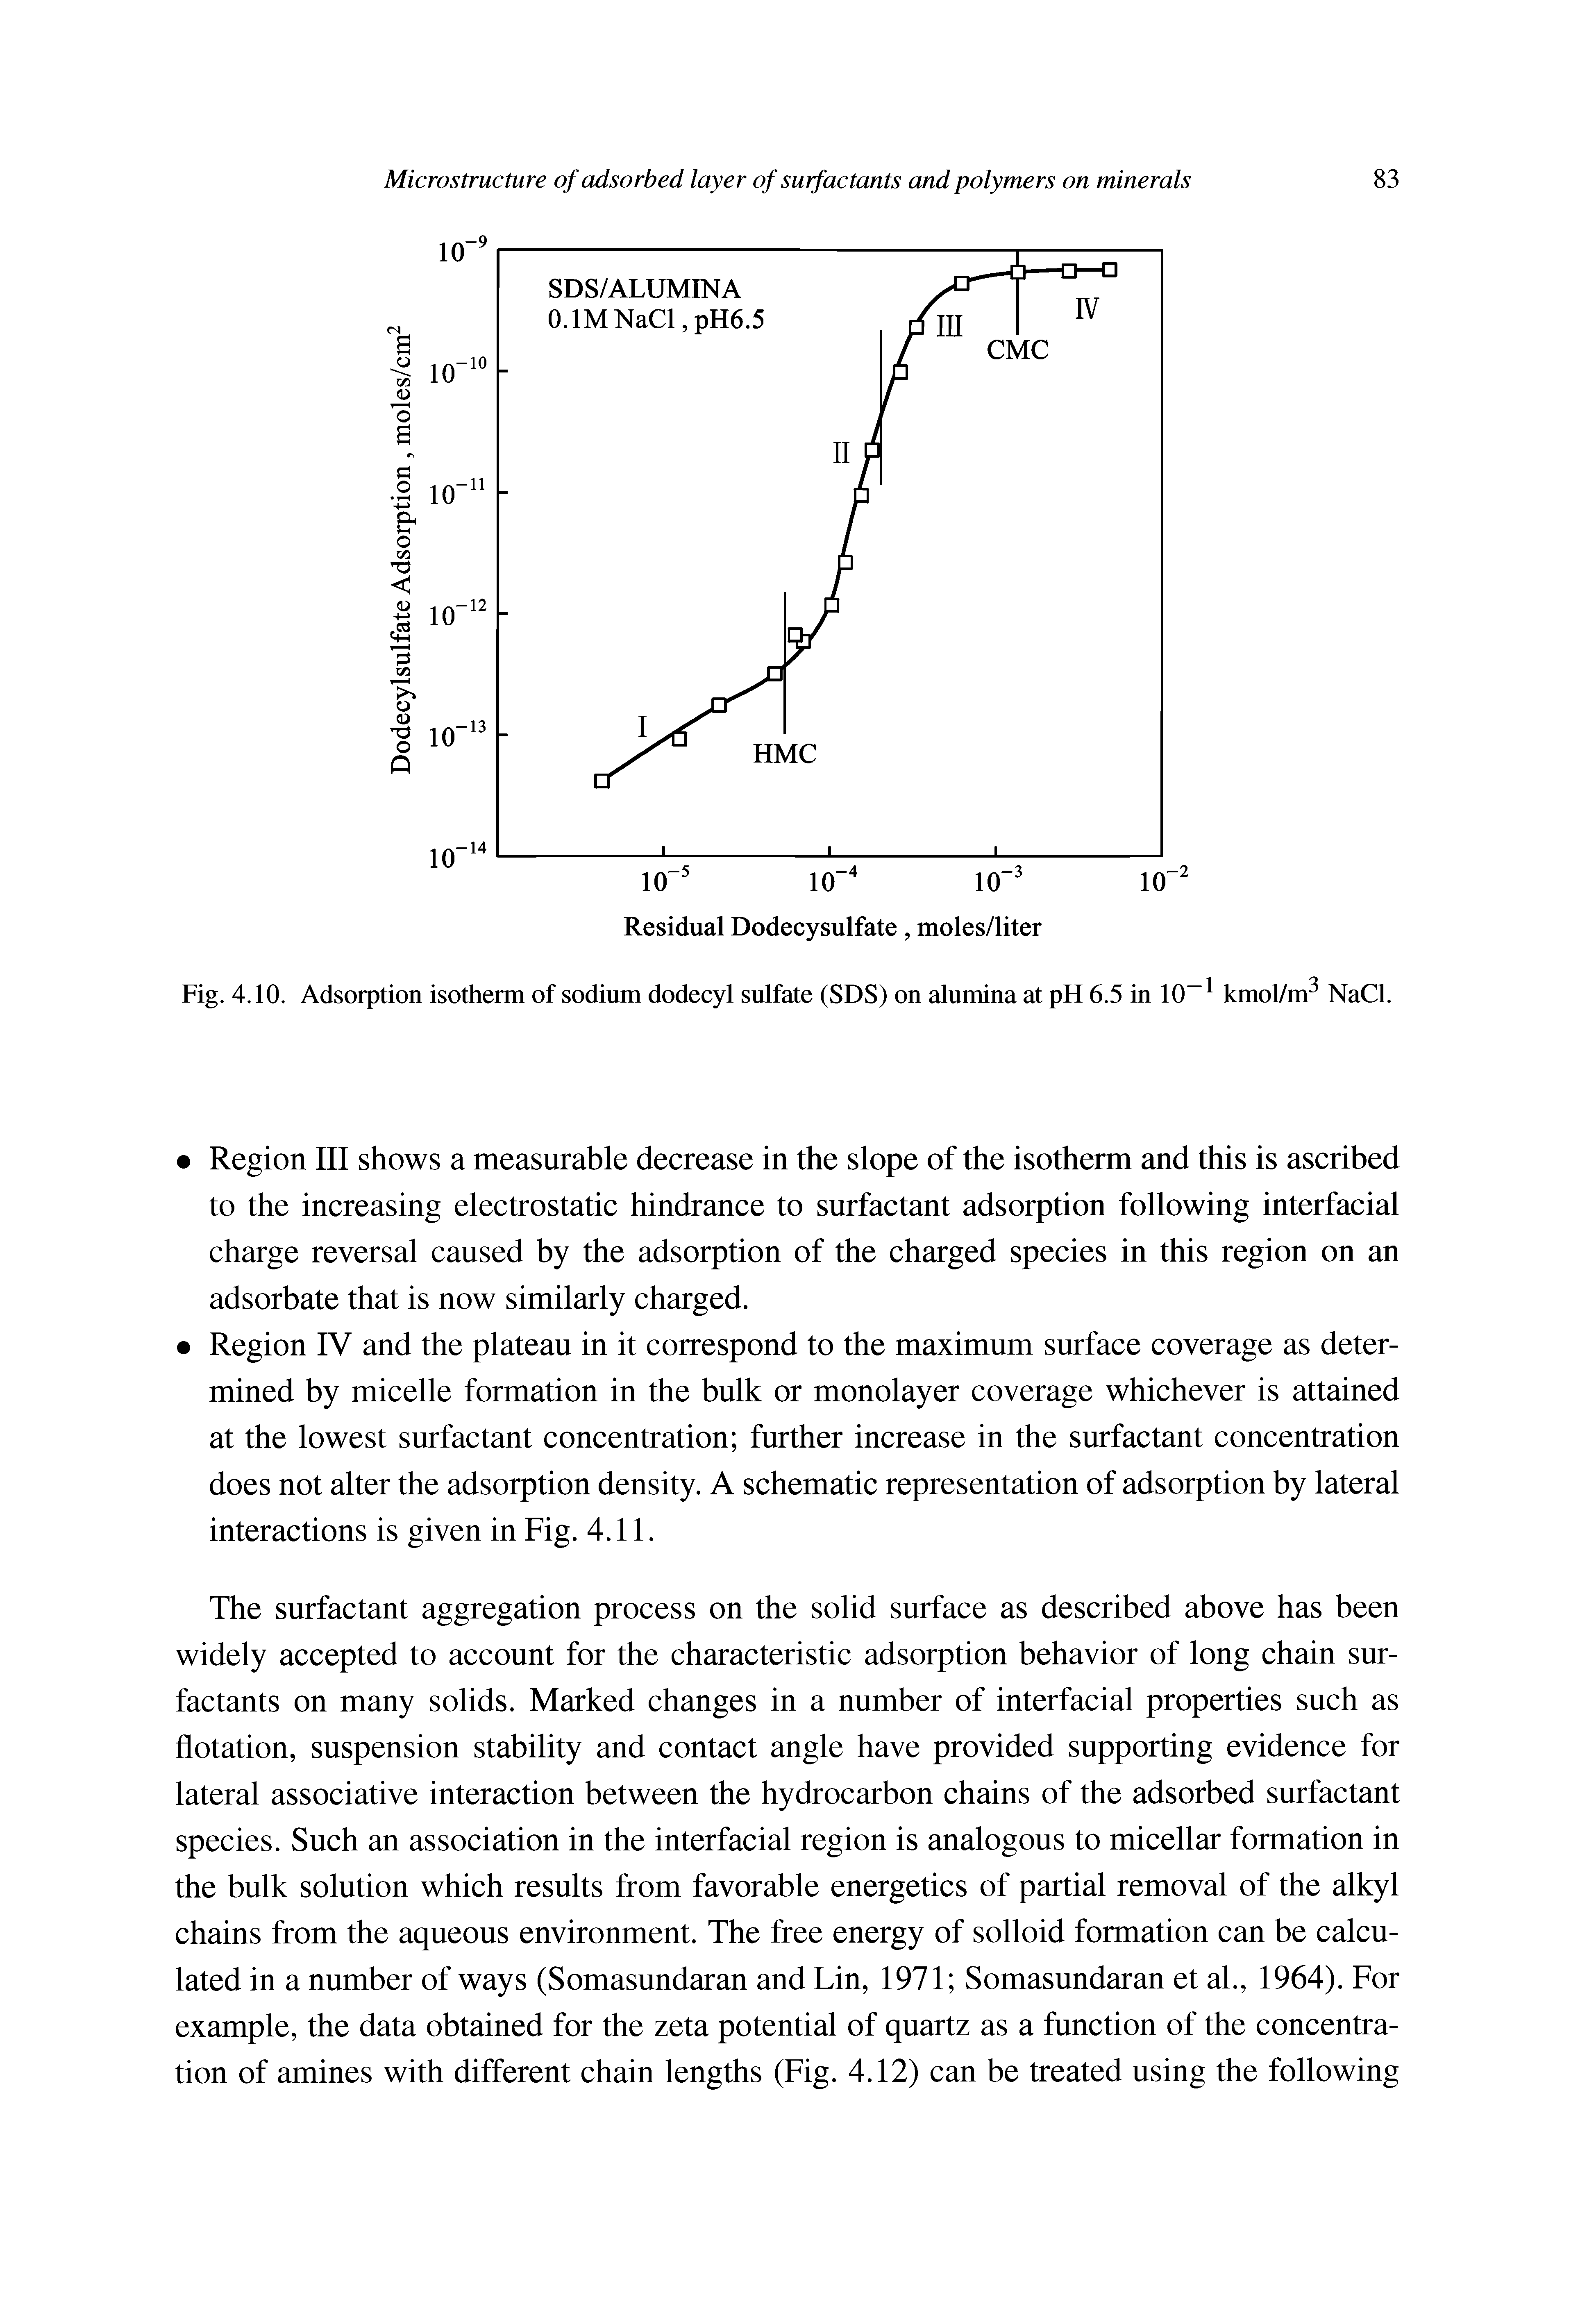 Fig. 4.10. Adsorption isotherm of sodium dodecyl sulfate (SDS) on alumina at pH 6.5 in 10 kmol/m NaCl.